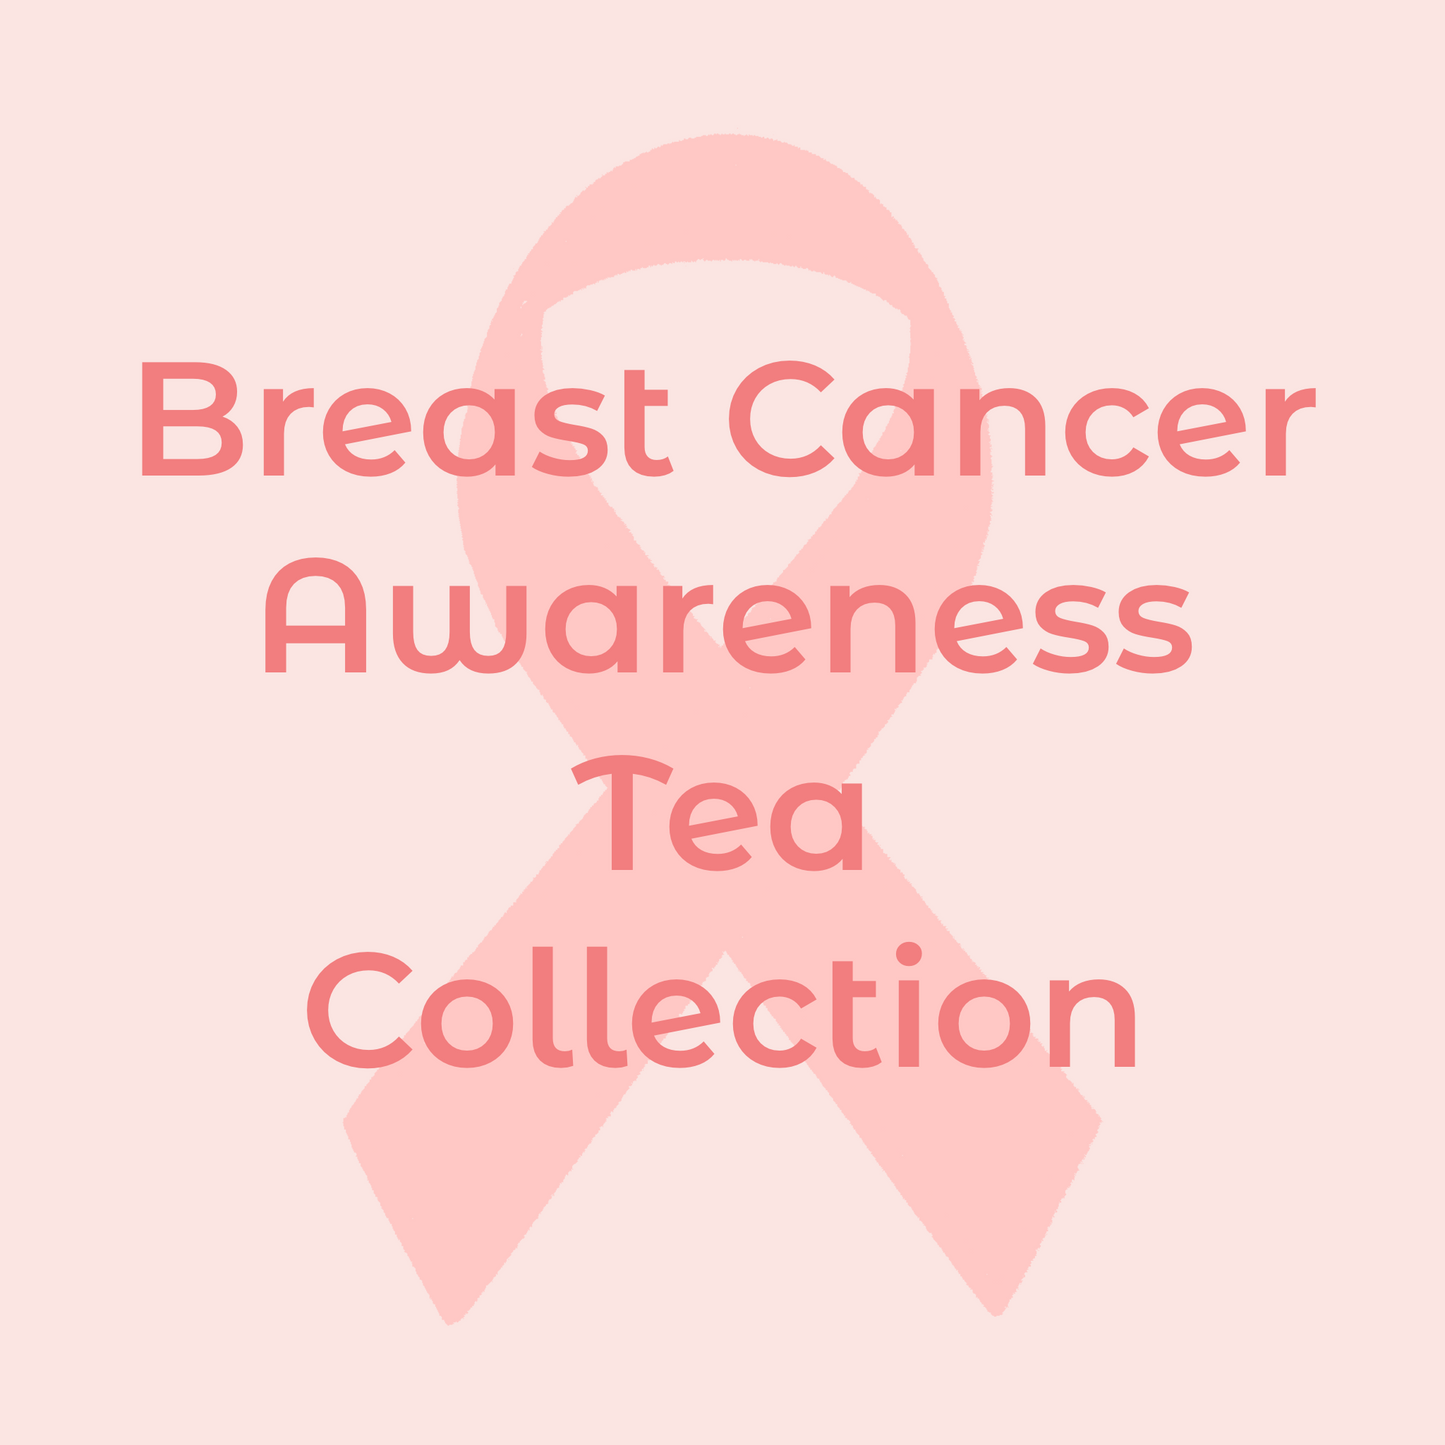 Breast Cancer Awareness Tea Collection from Sips by pink graphic with breast cancer awareness ribbon